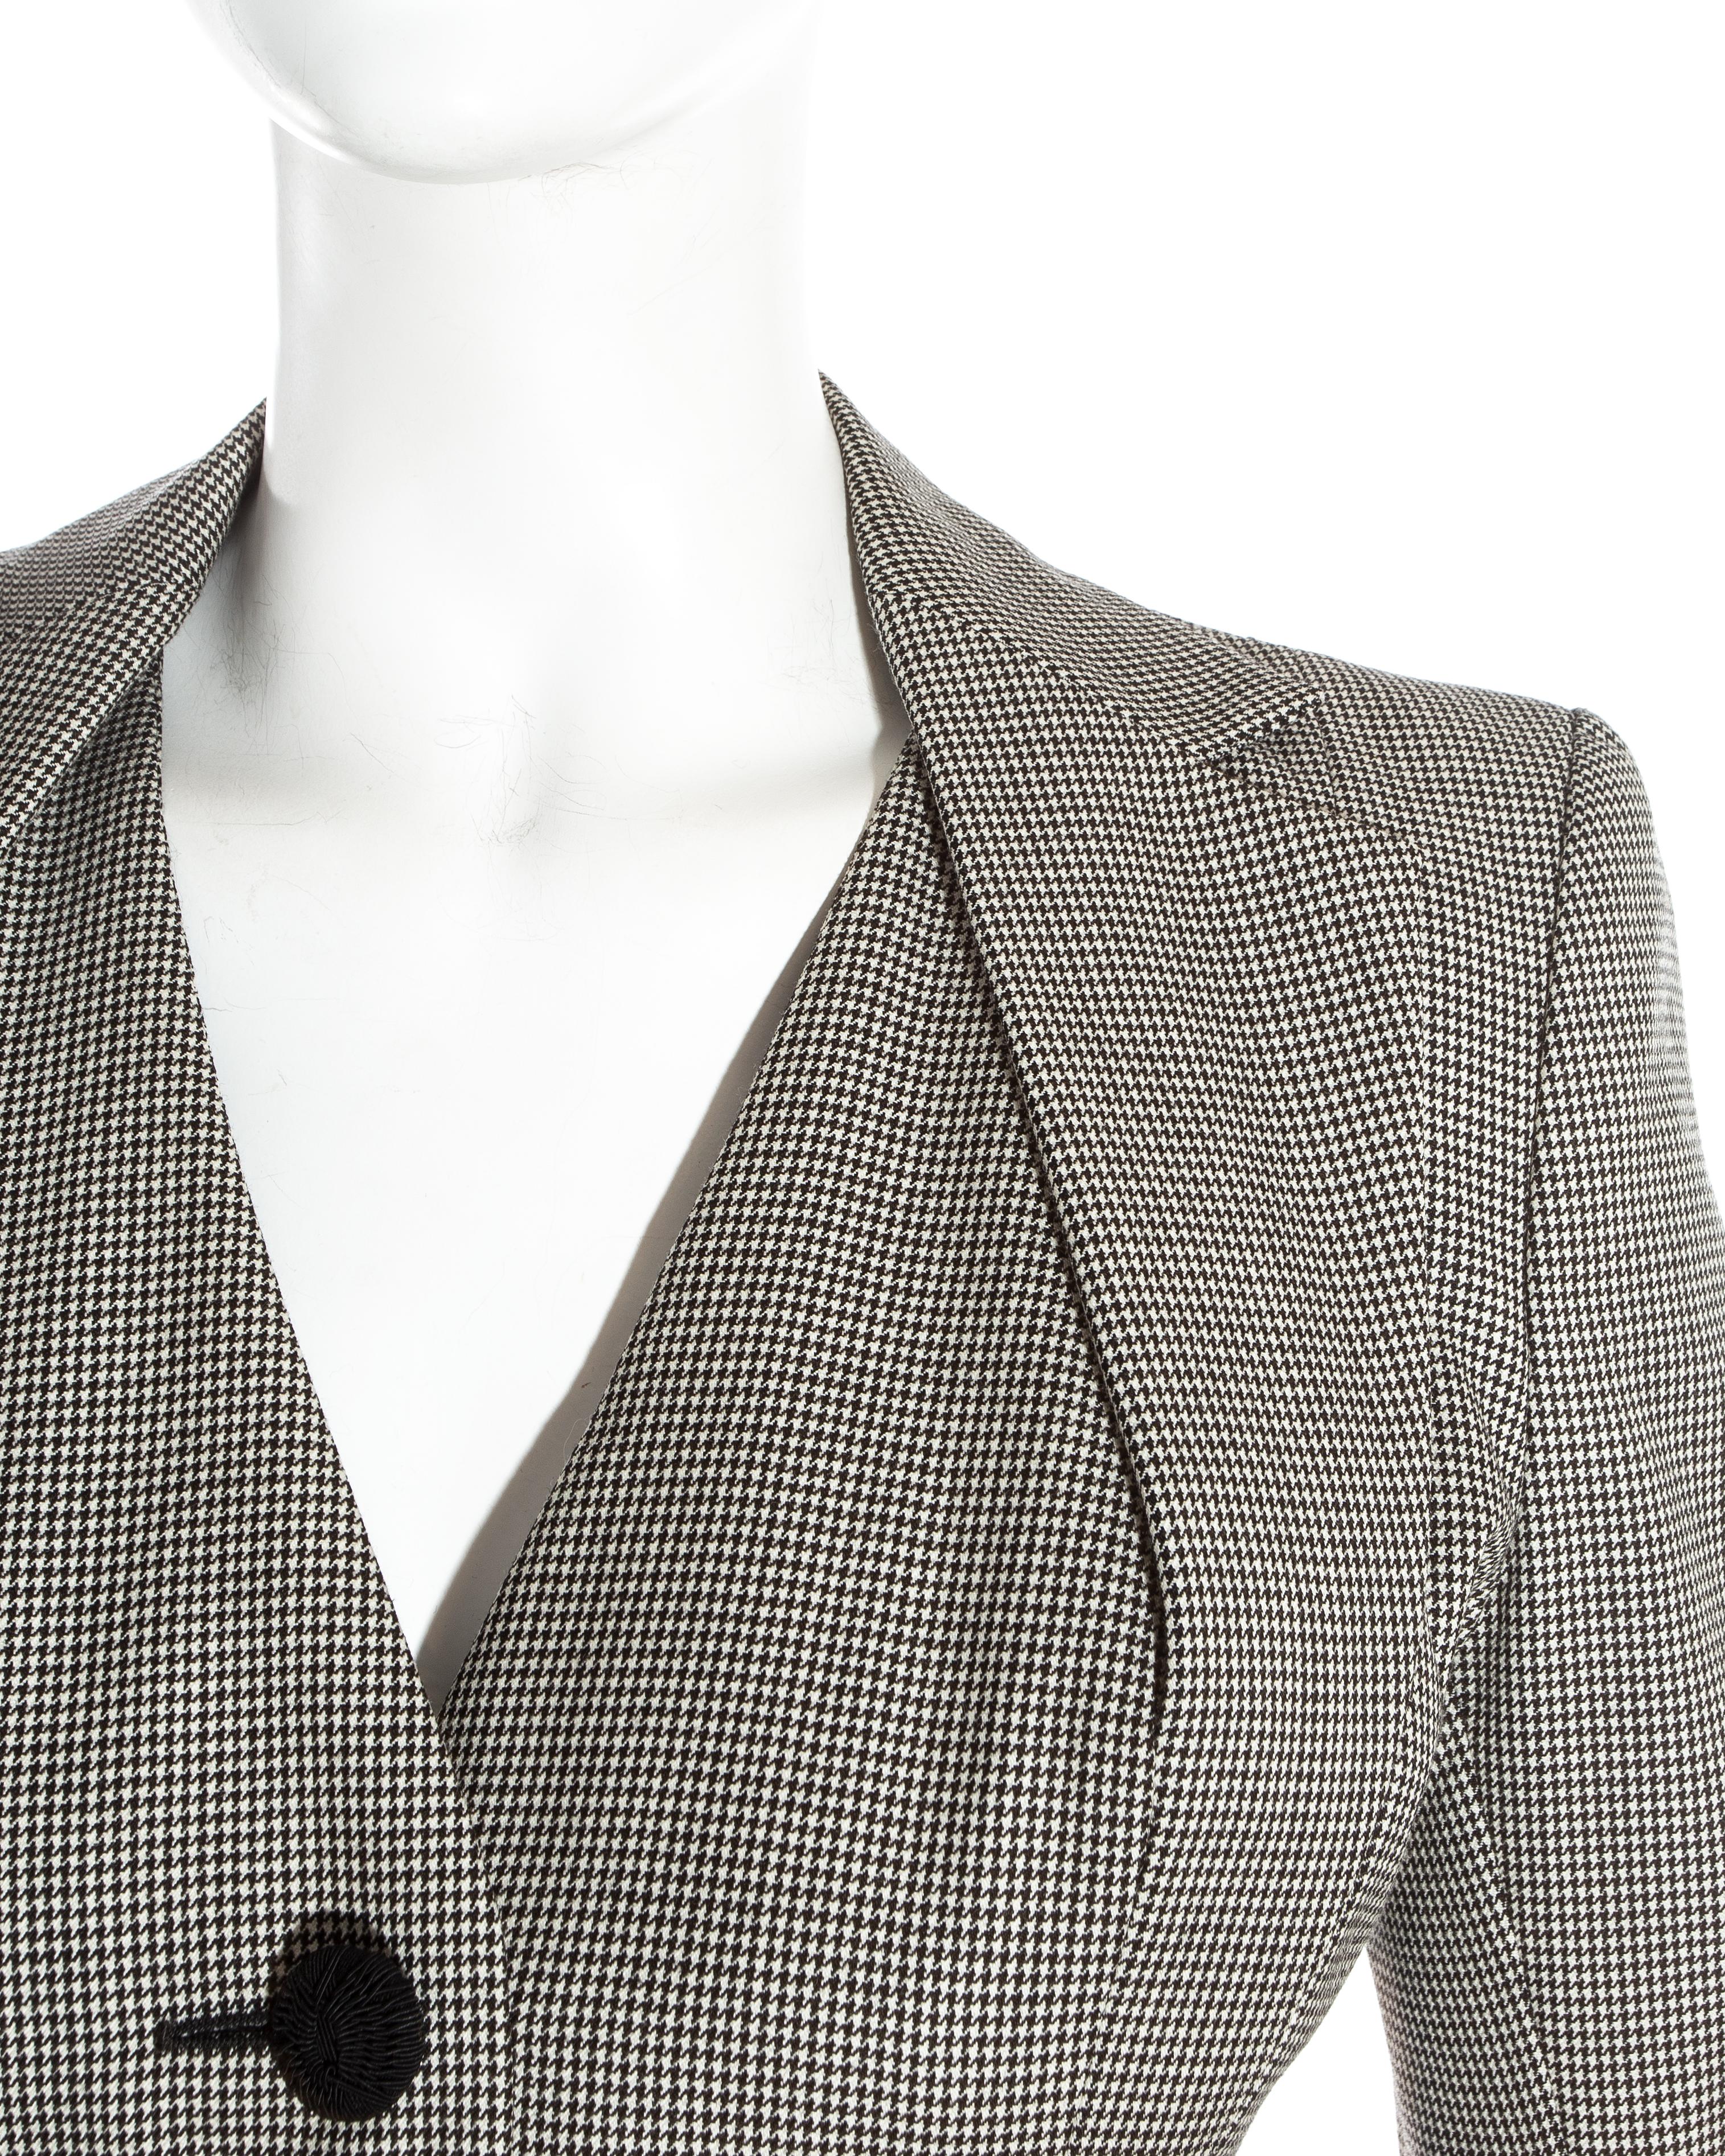 John Galliano hound's tooth check wool jacket with padded hips, ss 1995 1